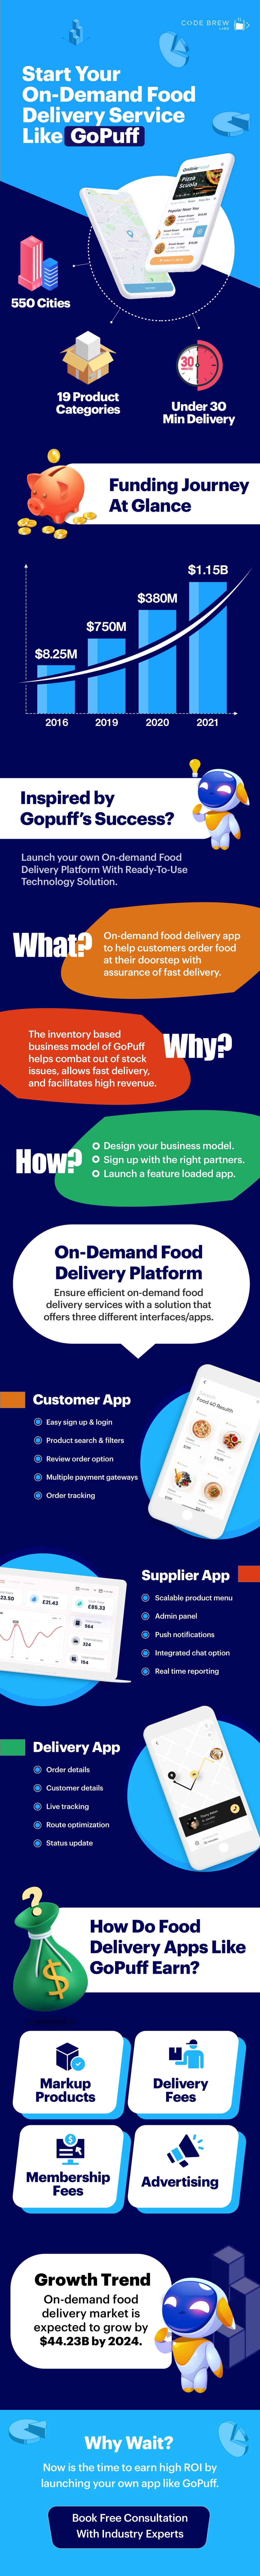 Launch on-demand food delivery app like GoPuff